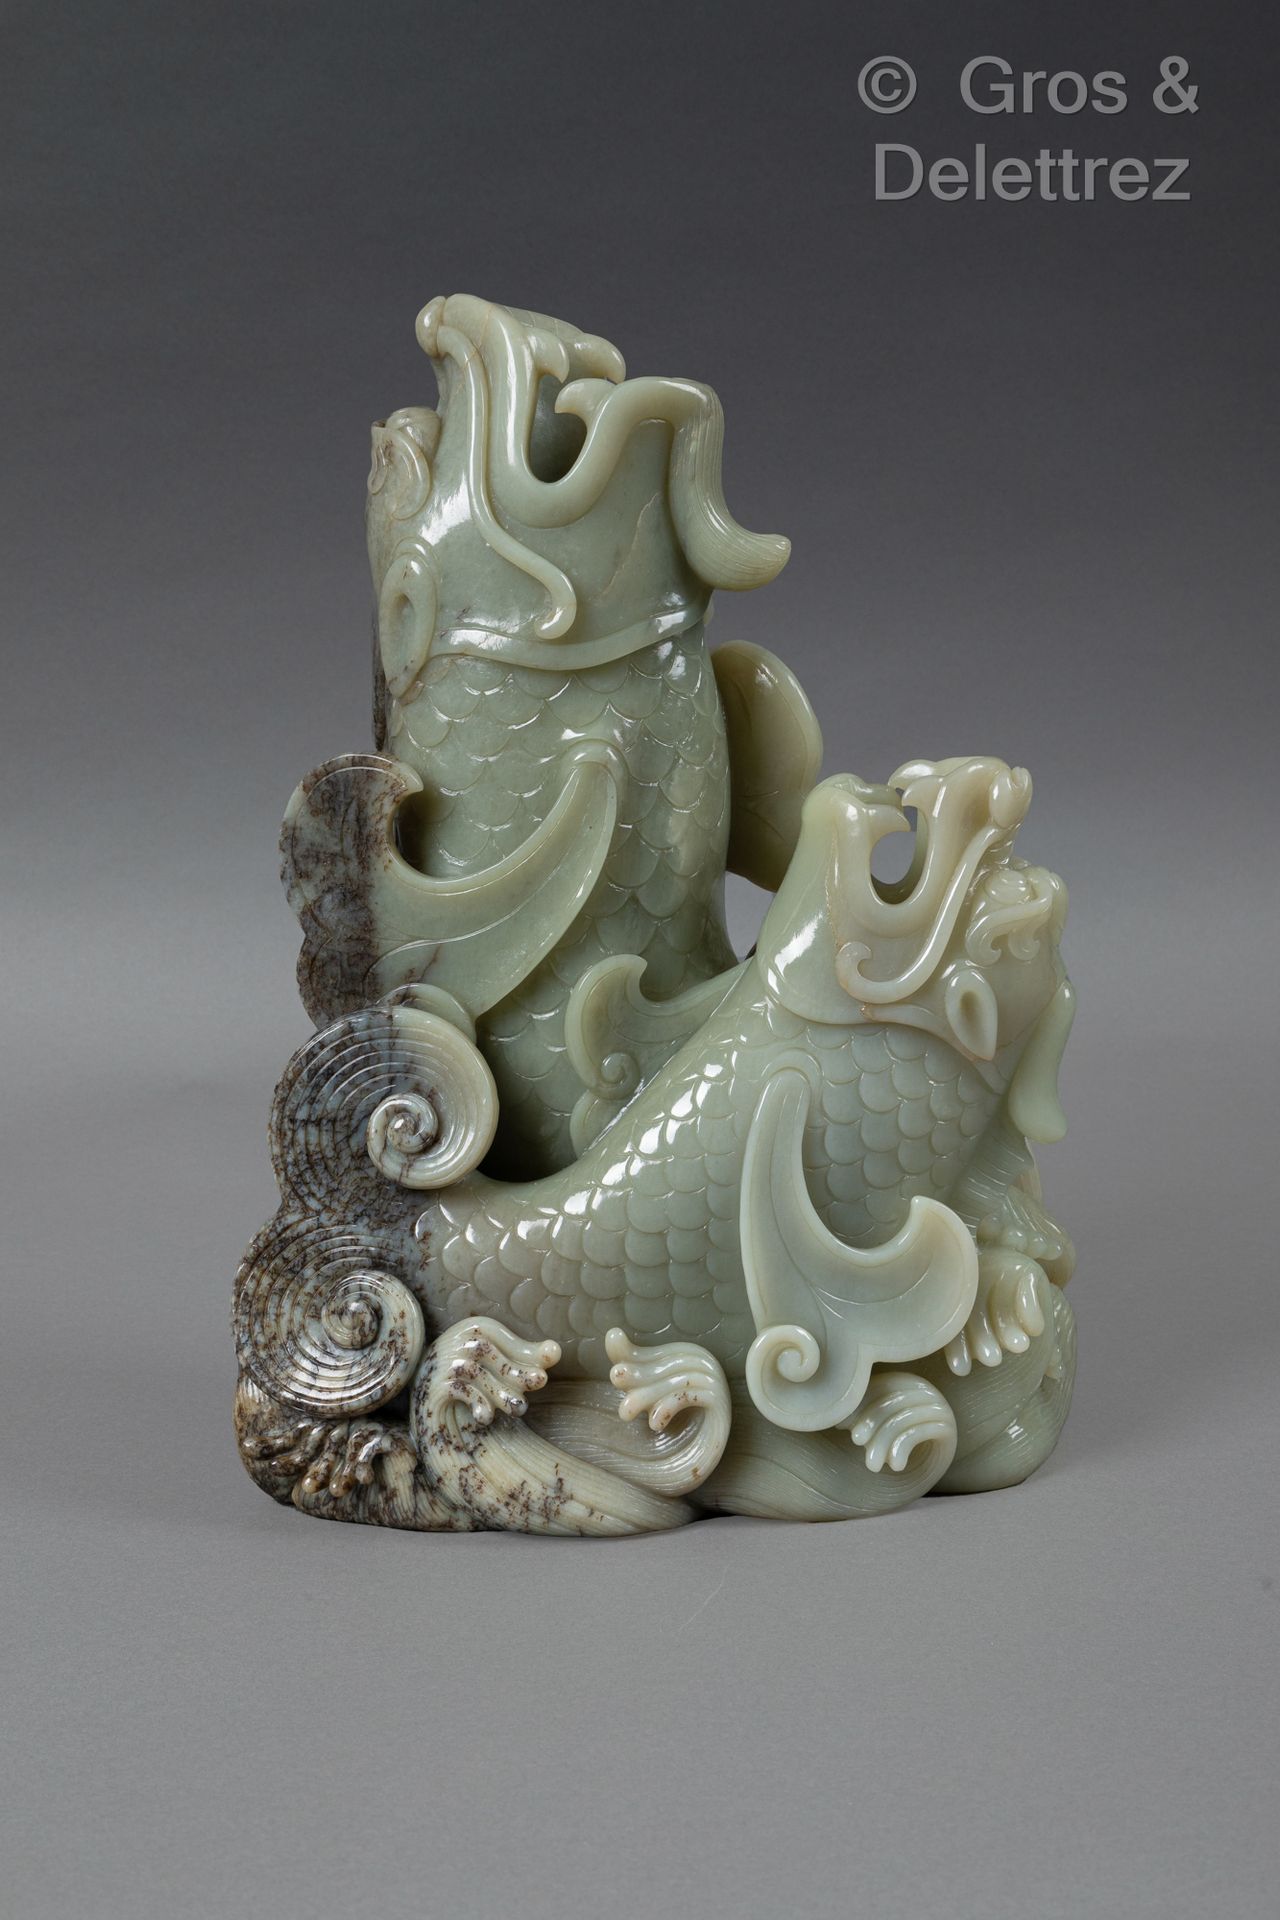 Null China, 20th century
Large group in brown-veined celadon jade, representing &hellip;